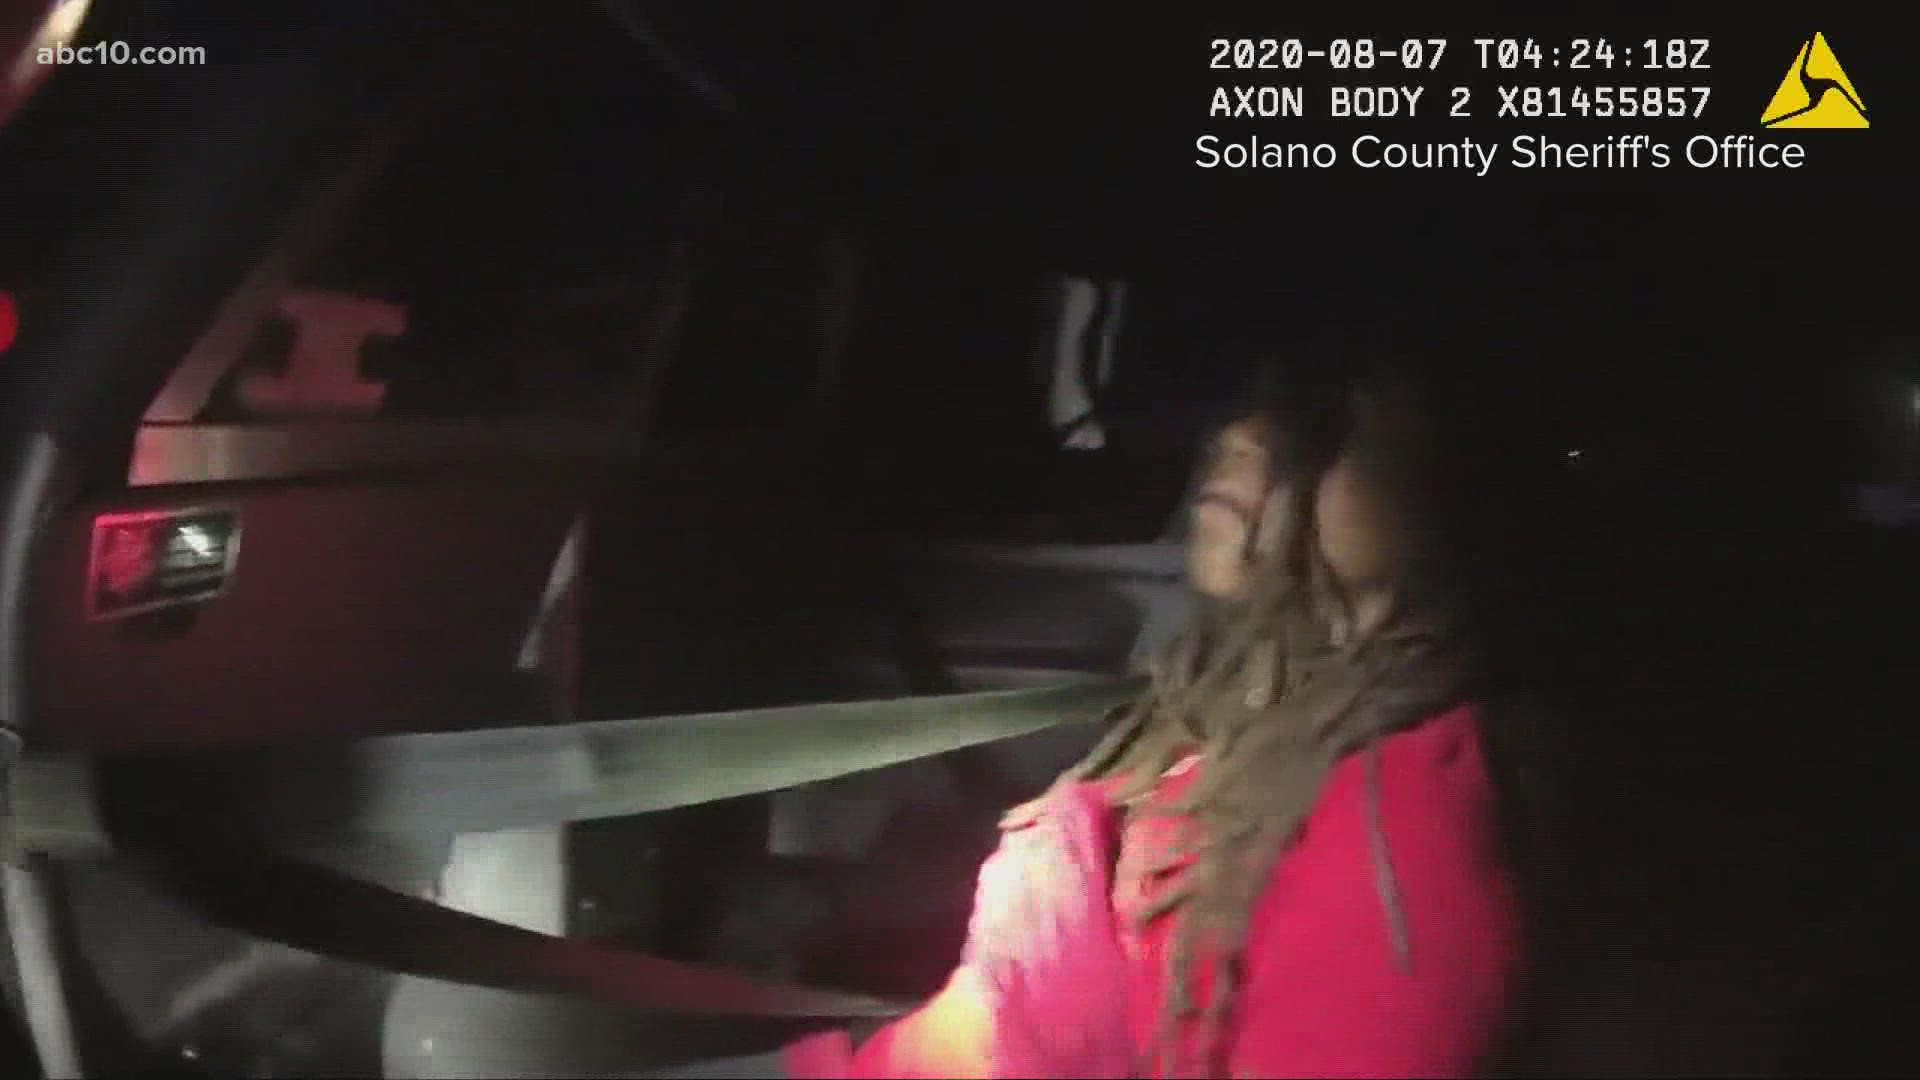 The Solano County Sheriff's Office released body and dash camera video after deputies were accused of violently arresting a black woman